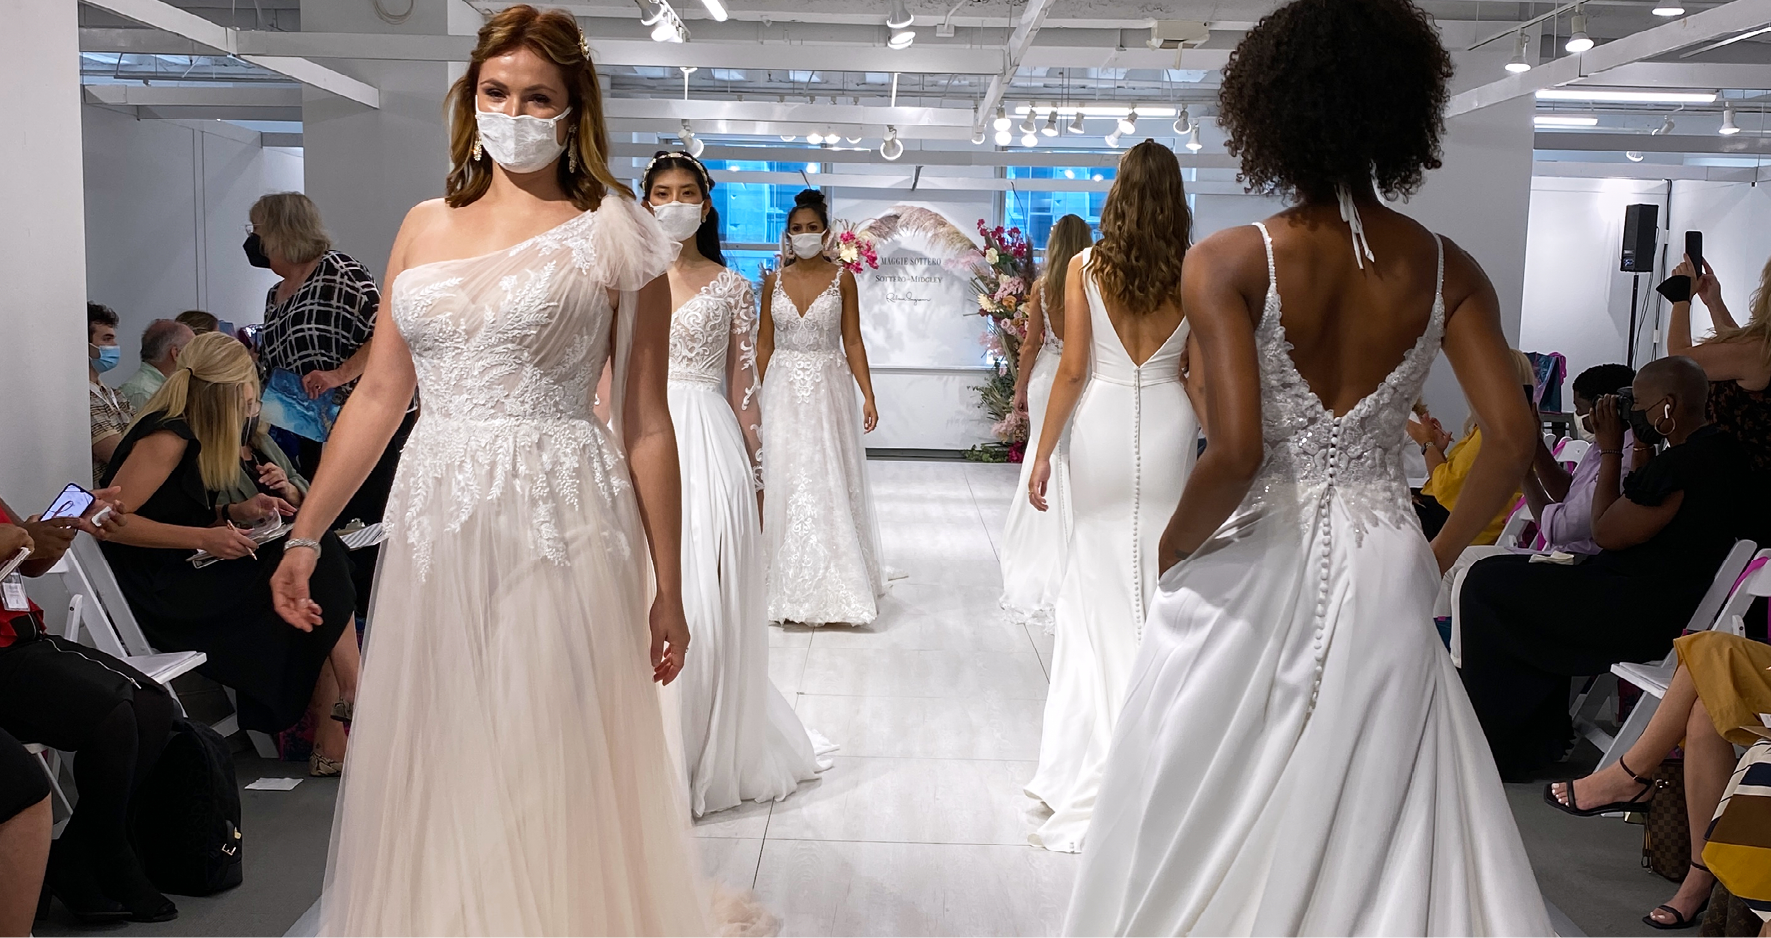 Models Walking on Runway at Chicago Bridal Market Showing Off Maggie Sottero's Hottest Runway Wedding Dresses for This Season